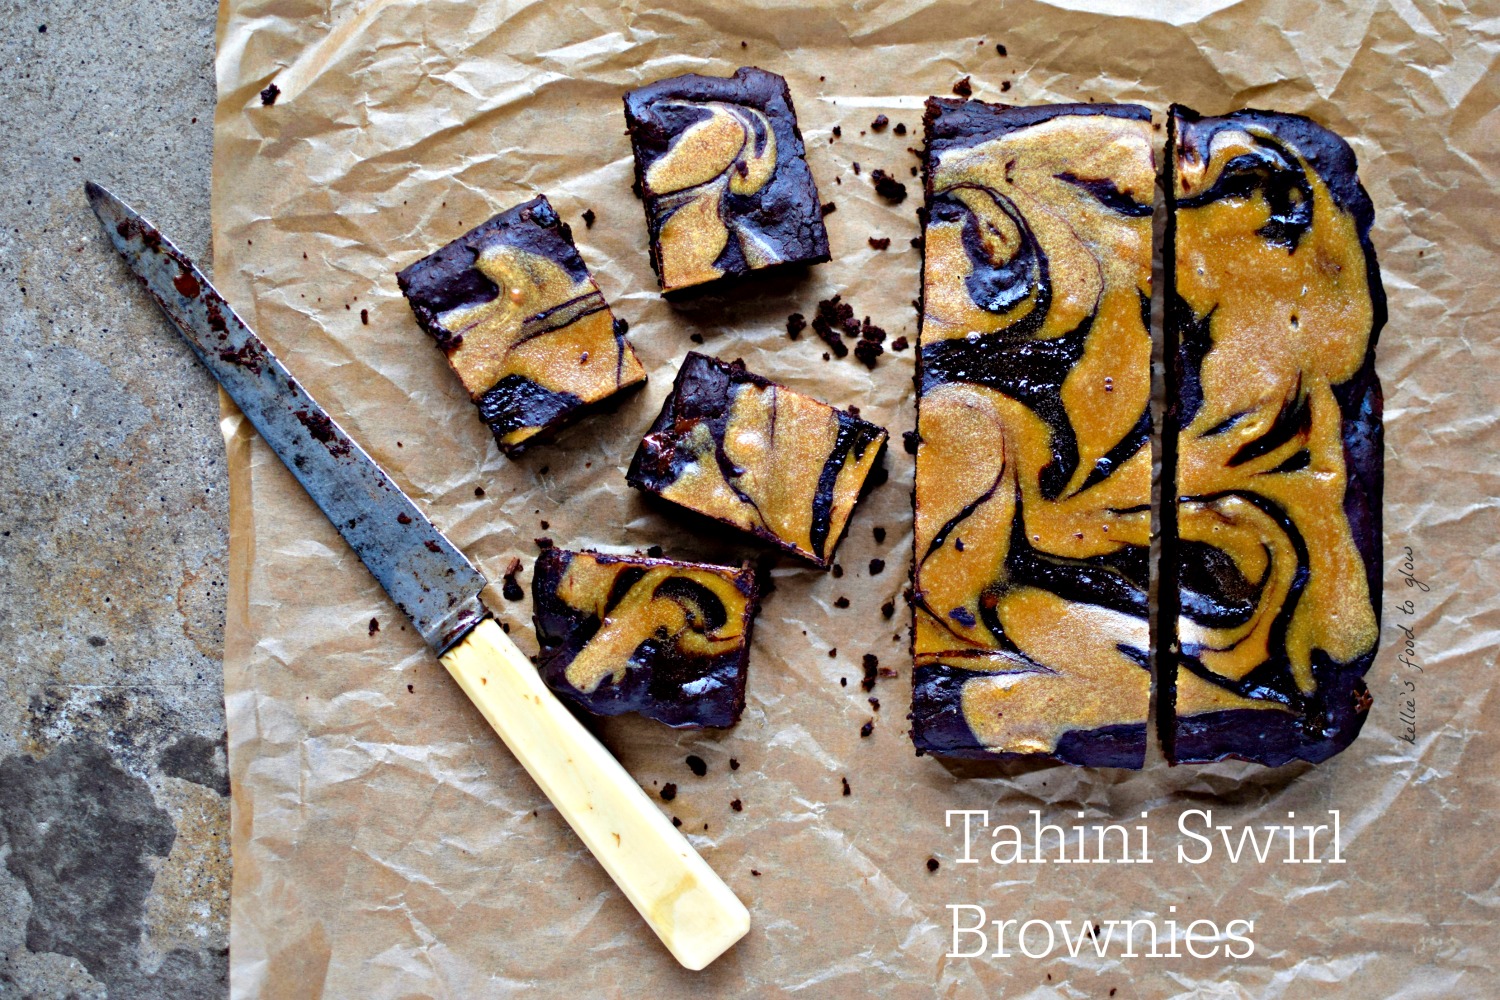 Comfort food + baking = chocolate brownies. It's a simple equation that even the most maths phobic person can get their head around. Black beans, dates and chaga send you to the top of the class. This is the perfect recipe whether you like fudgy brownies or cakey brownies. Win-win! Gluten-free, refined sugar-free, and with an immune-boosting, energising optional shot of chaga.